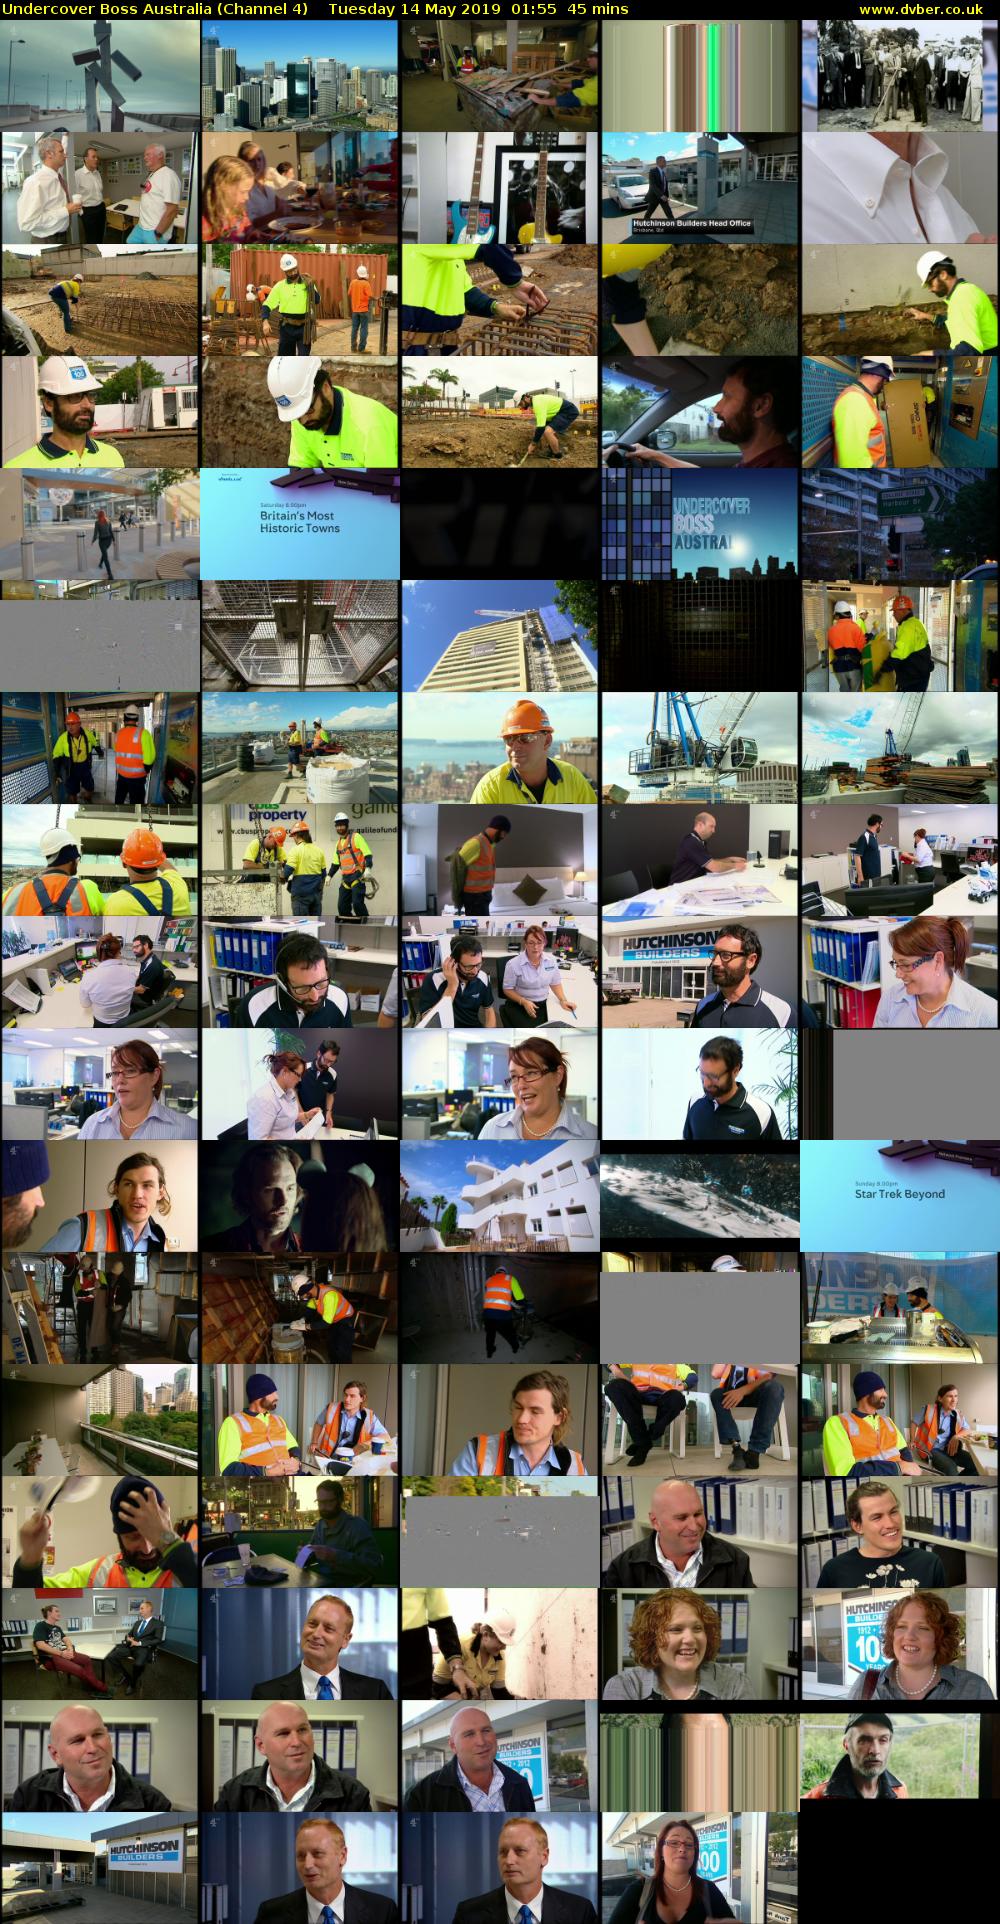 Undercover Boss Australia (Channel 4) Tuesday 14 May 2019 01:55 - 02:40